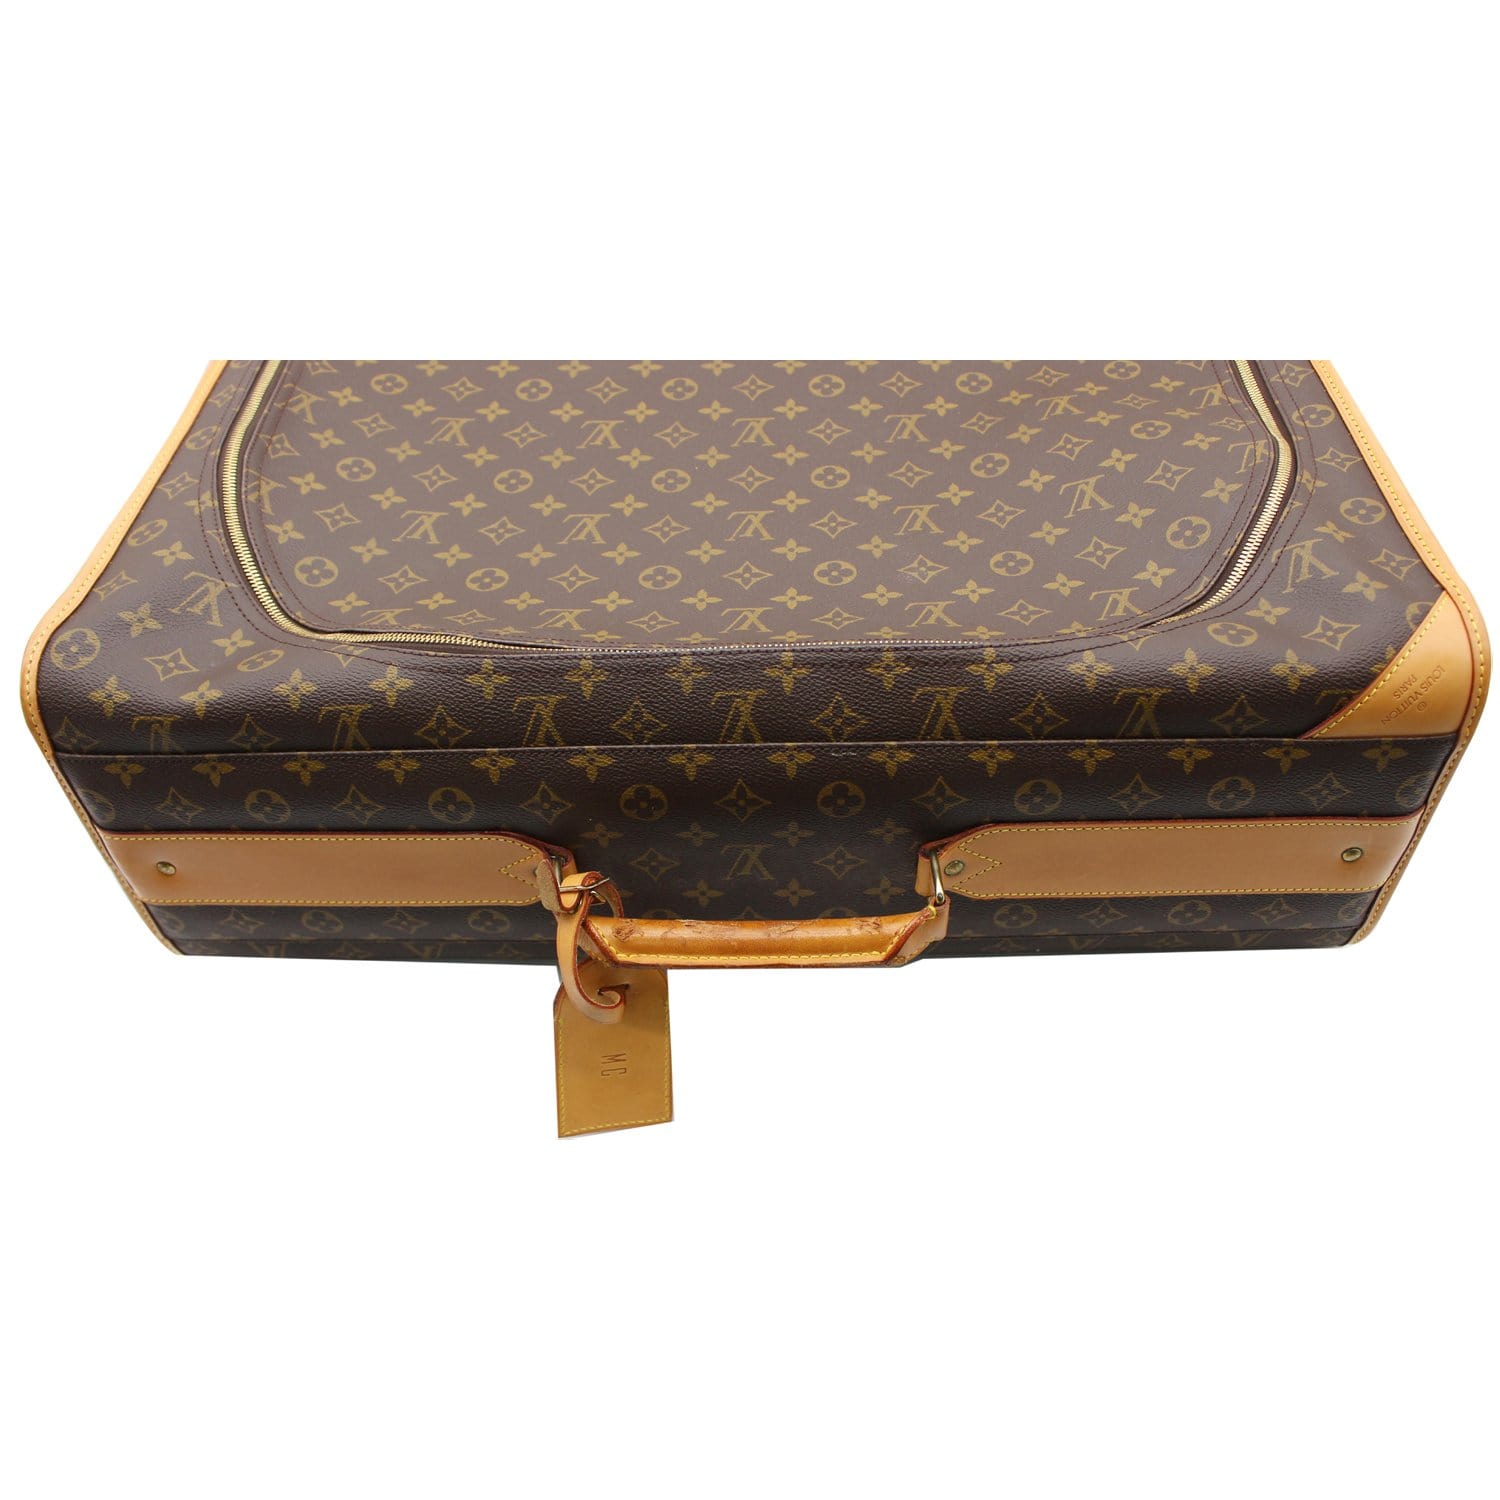 A Louis Vuitton Monogram Pullman 75 sold at auction on 27th June